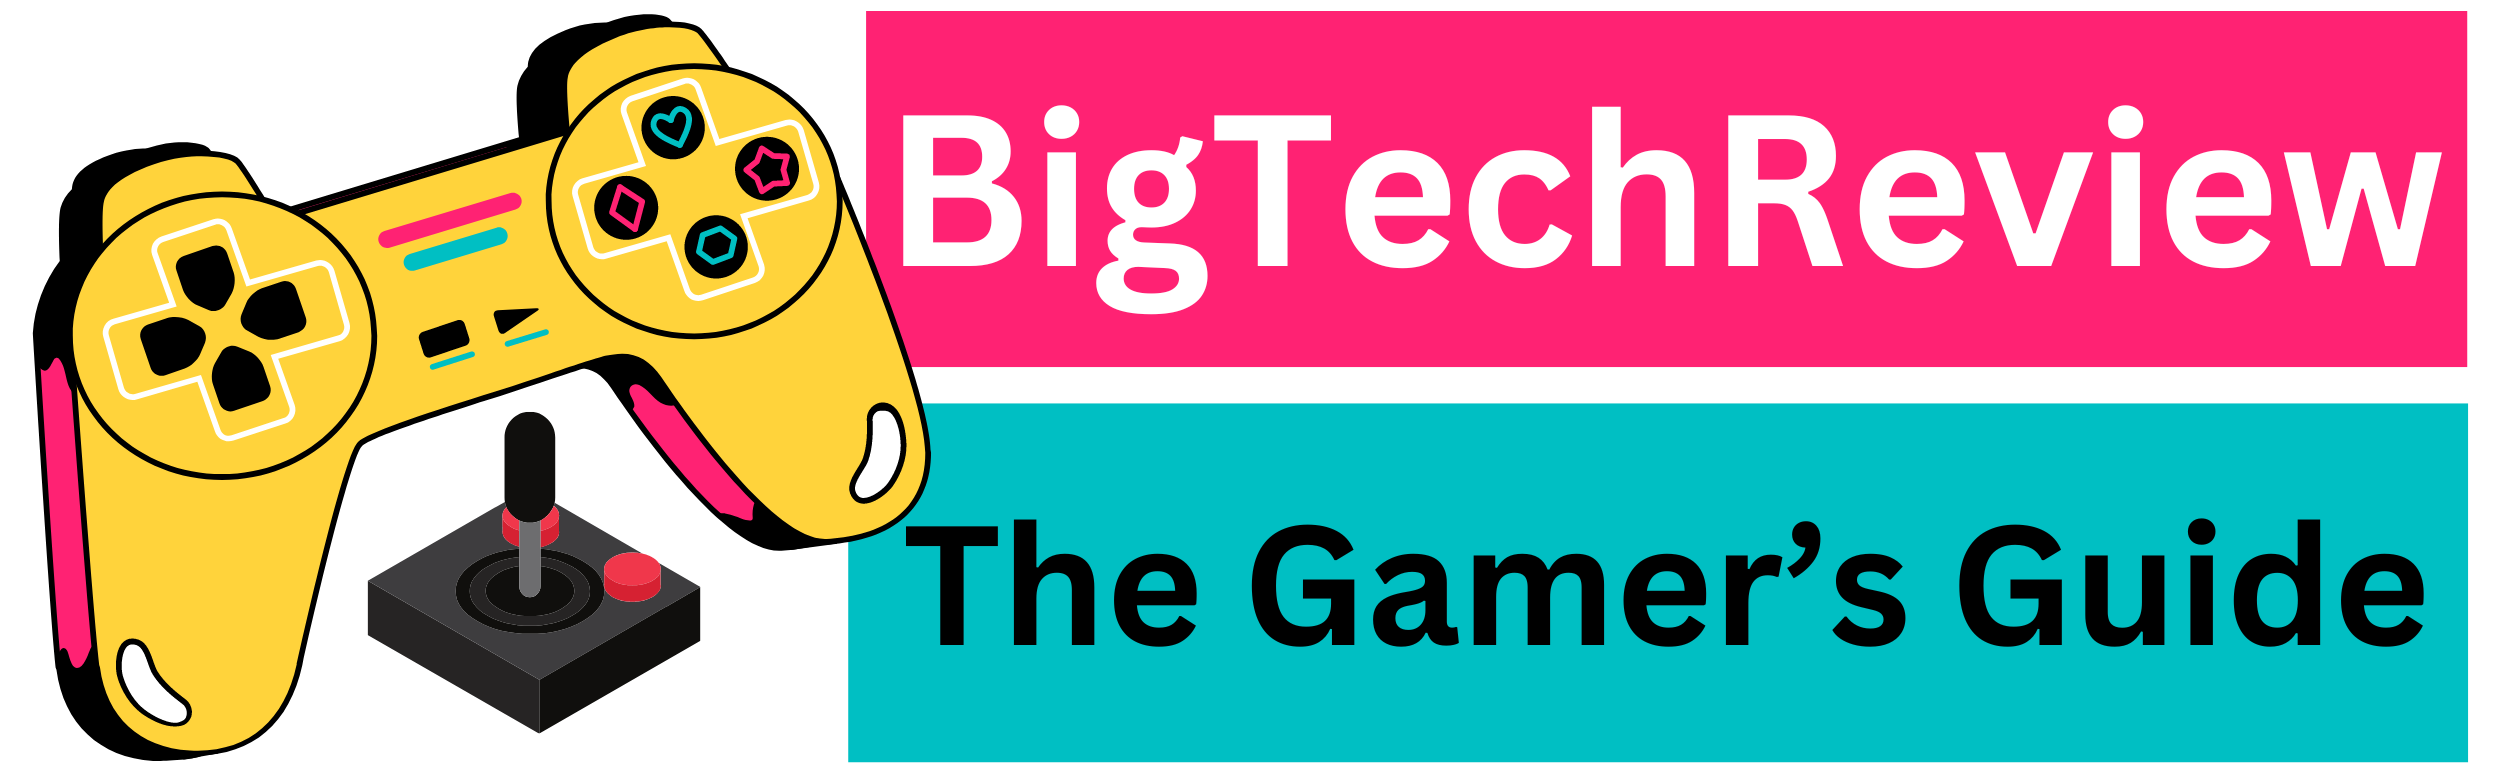 BigTechReview